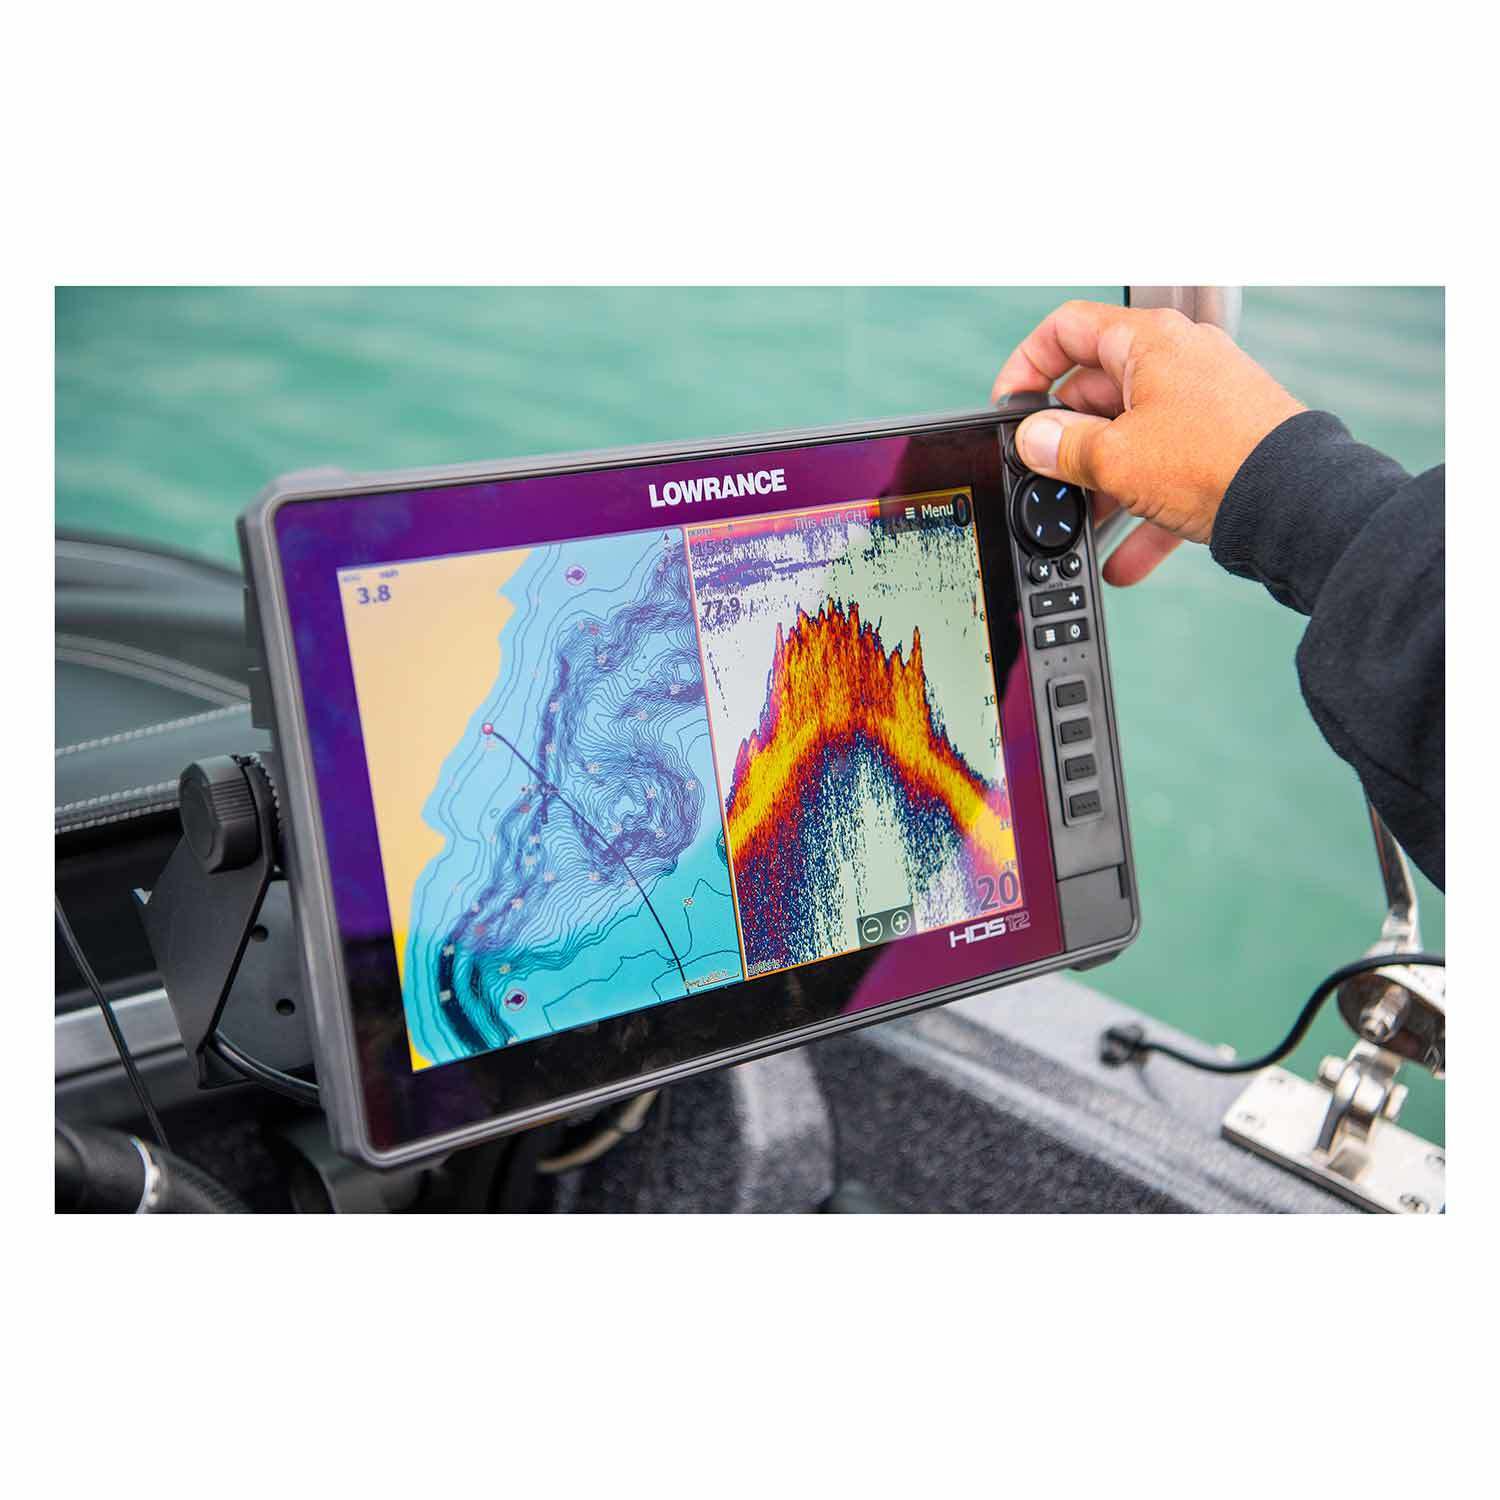 Lowrance HDS-12 Live 3-in-1 Transducer for sale online 